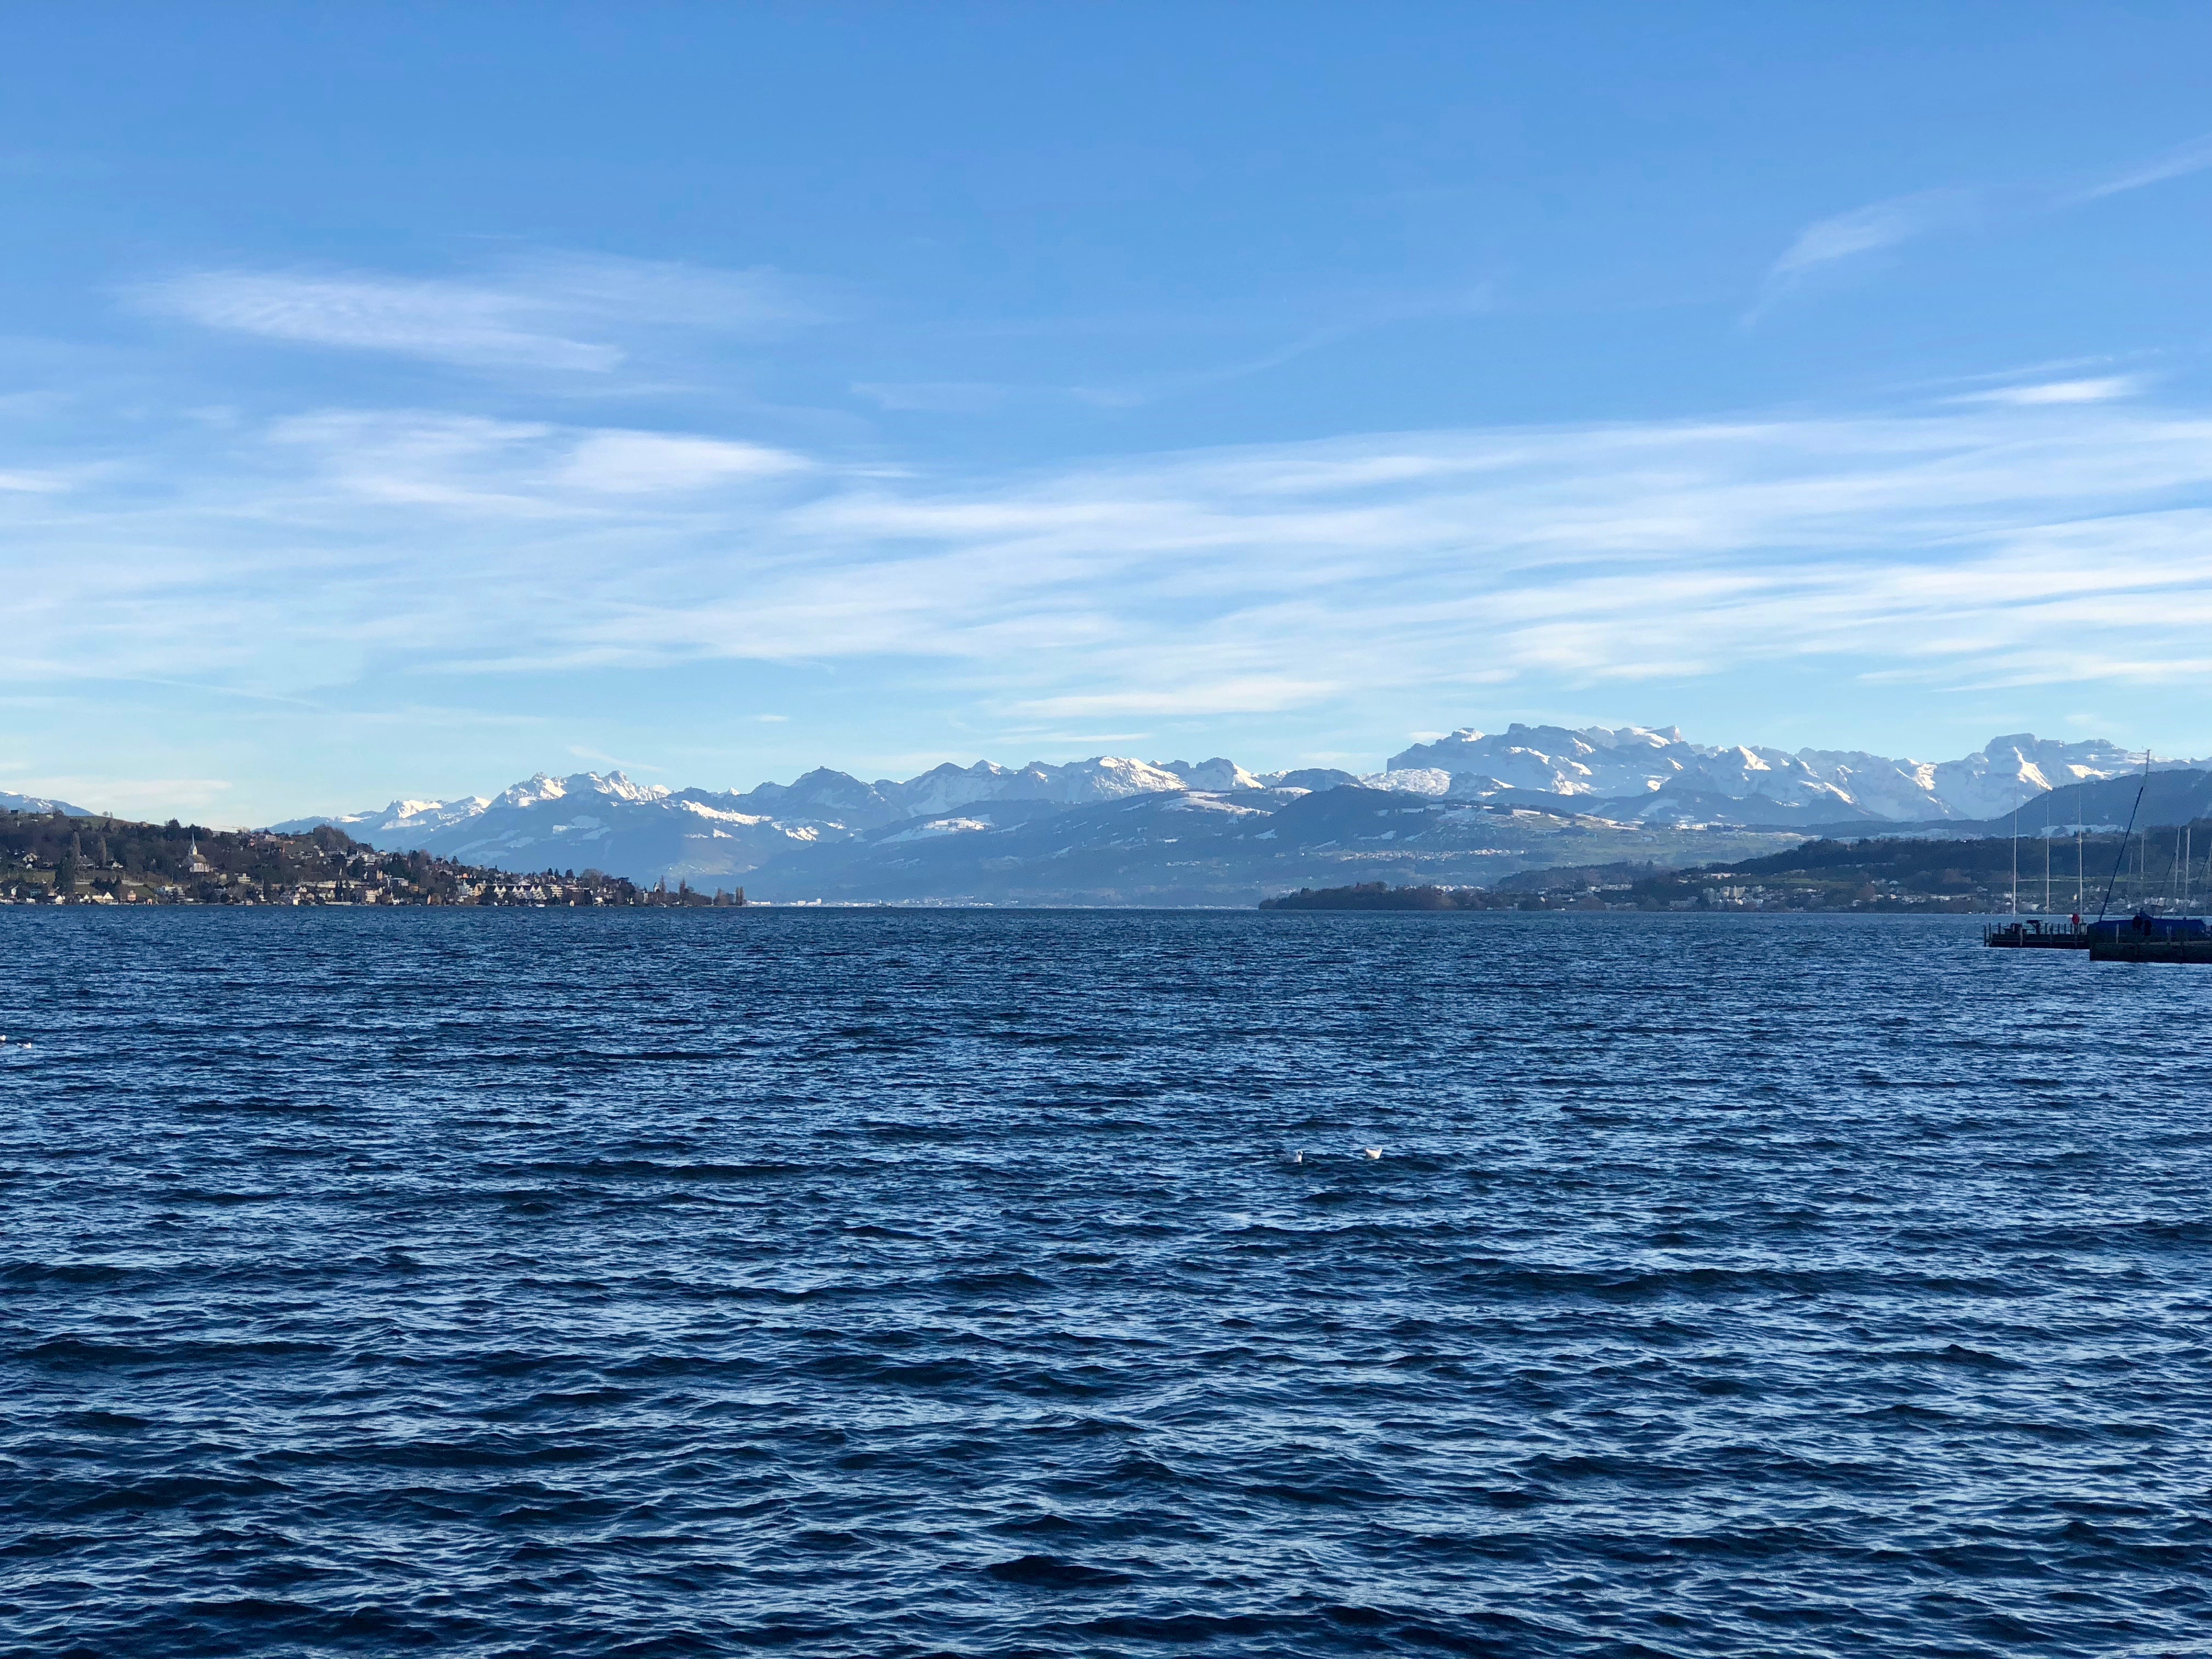 Views of the Alps from a boat cruise in Zurich, Switzerland.